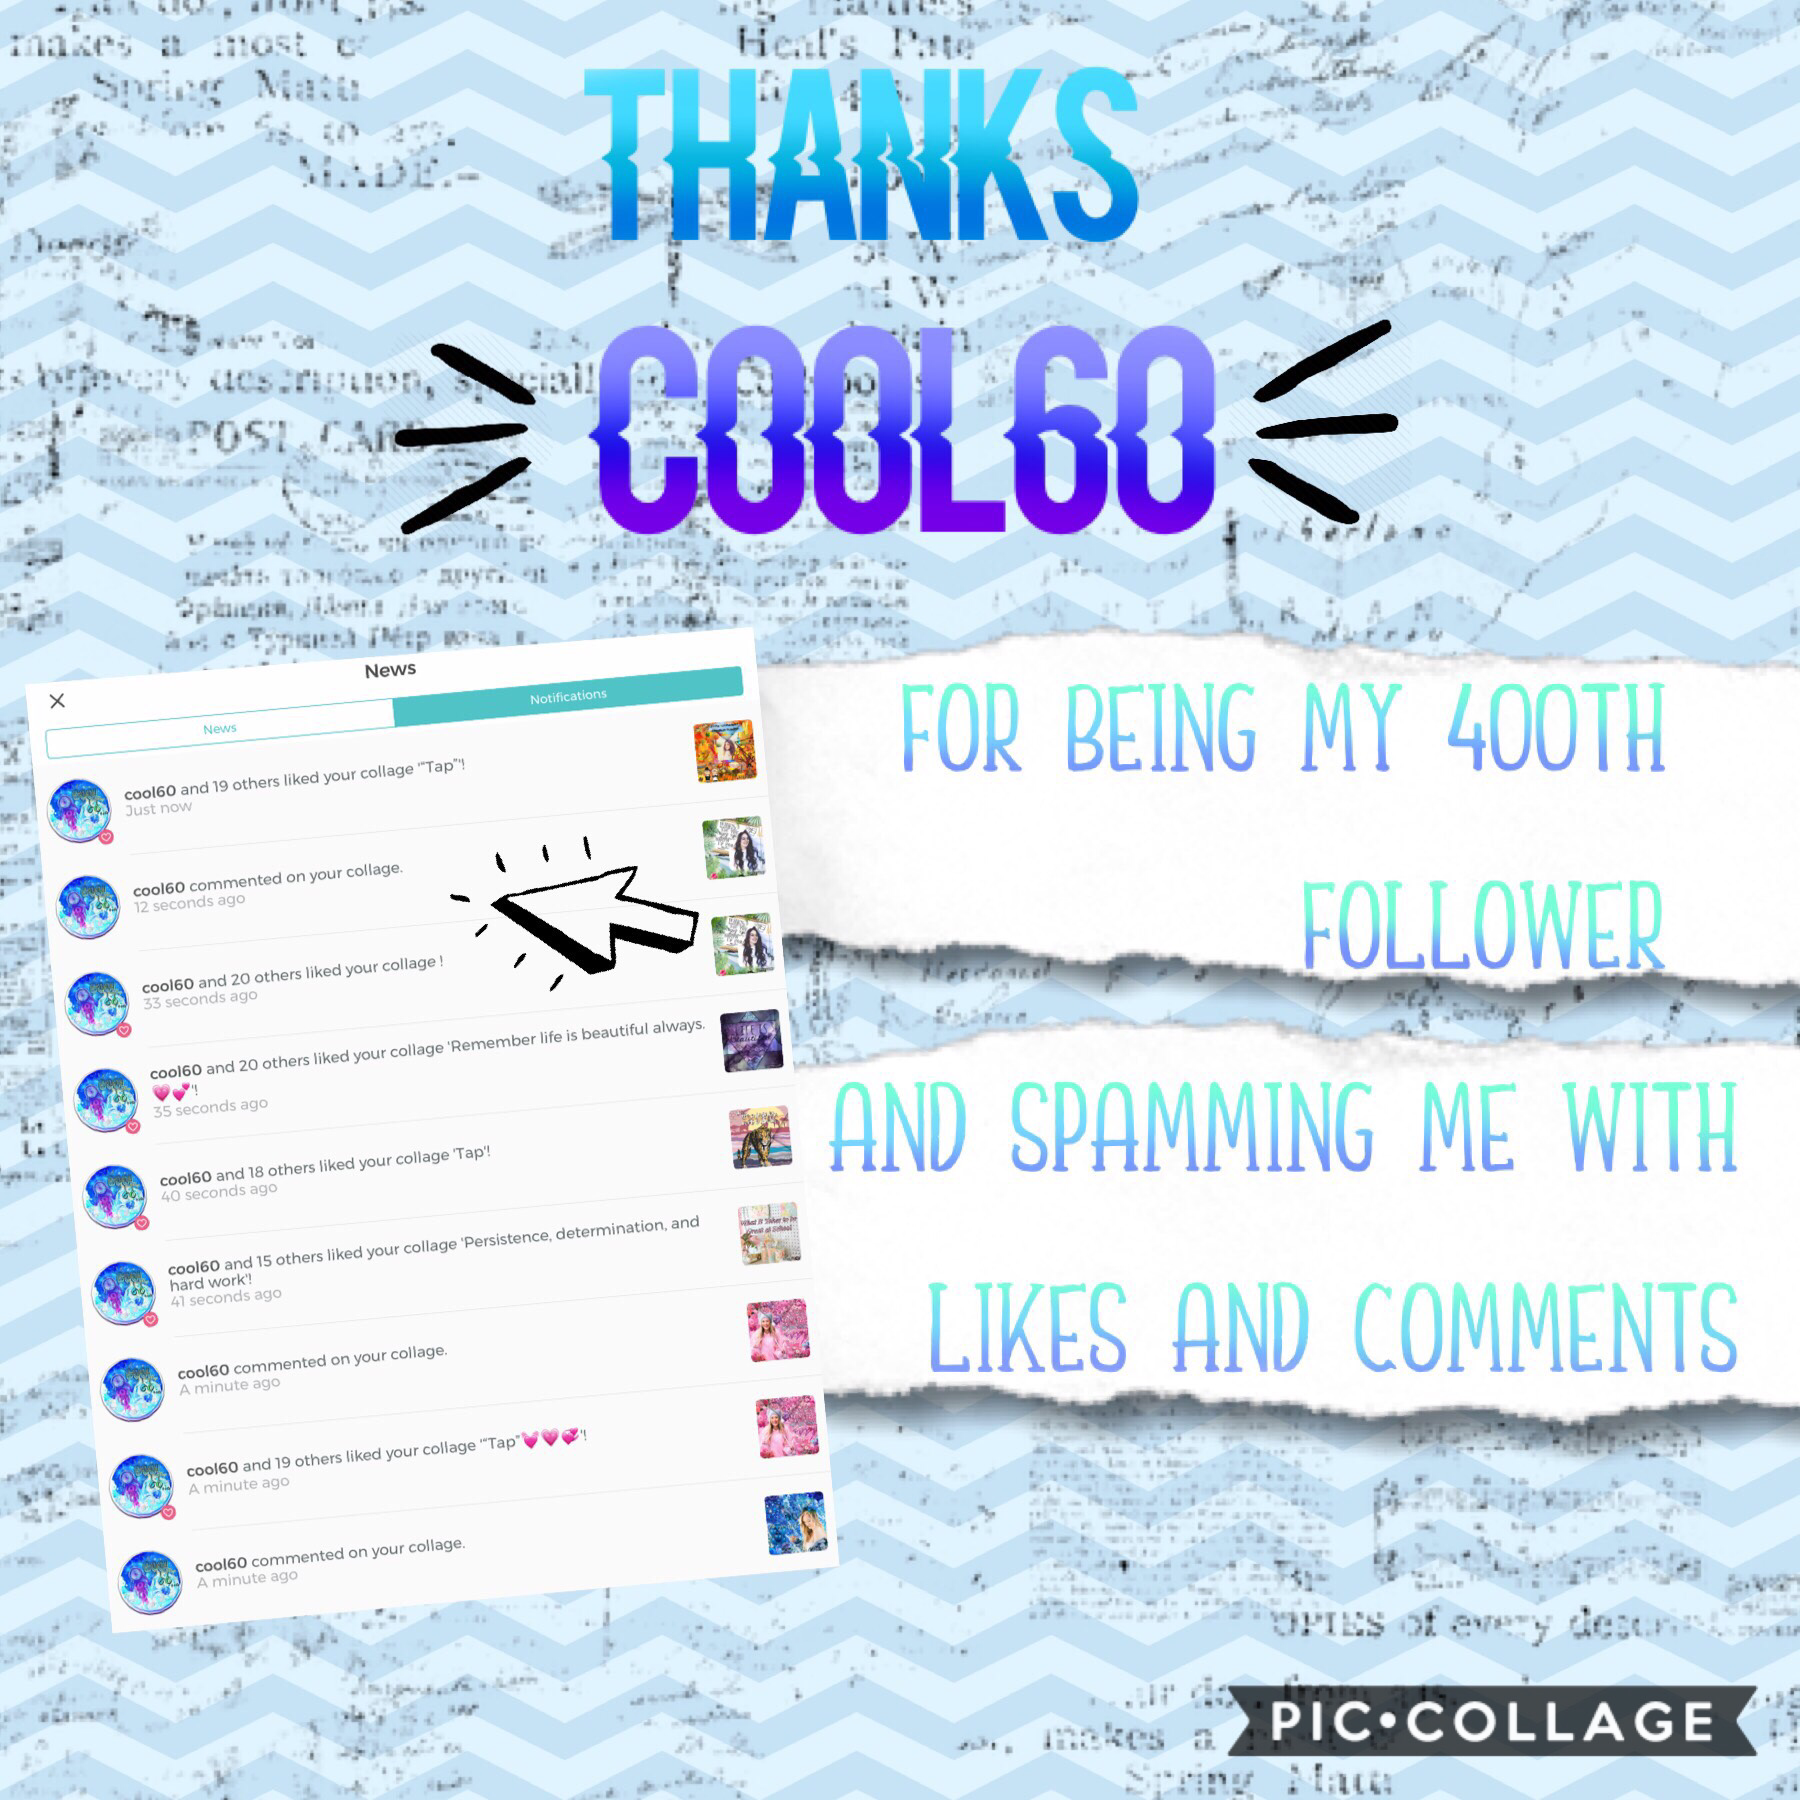 Congrats Cool60 for being my 400th follower and spamming me with likes and comments!!!💞💕💖🎉🎊